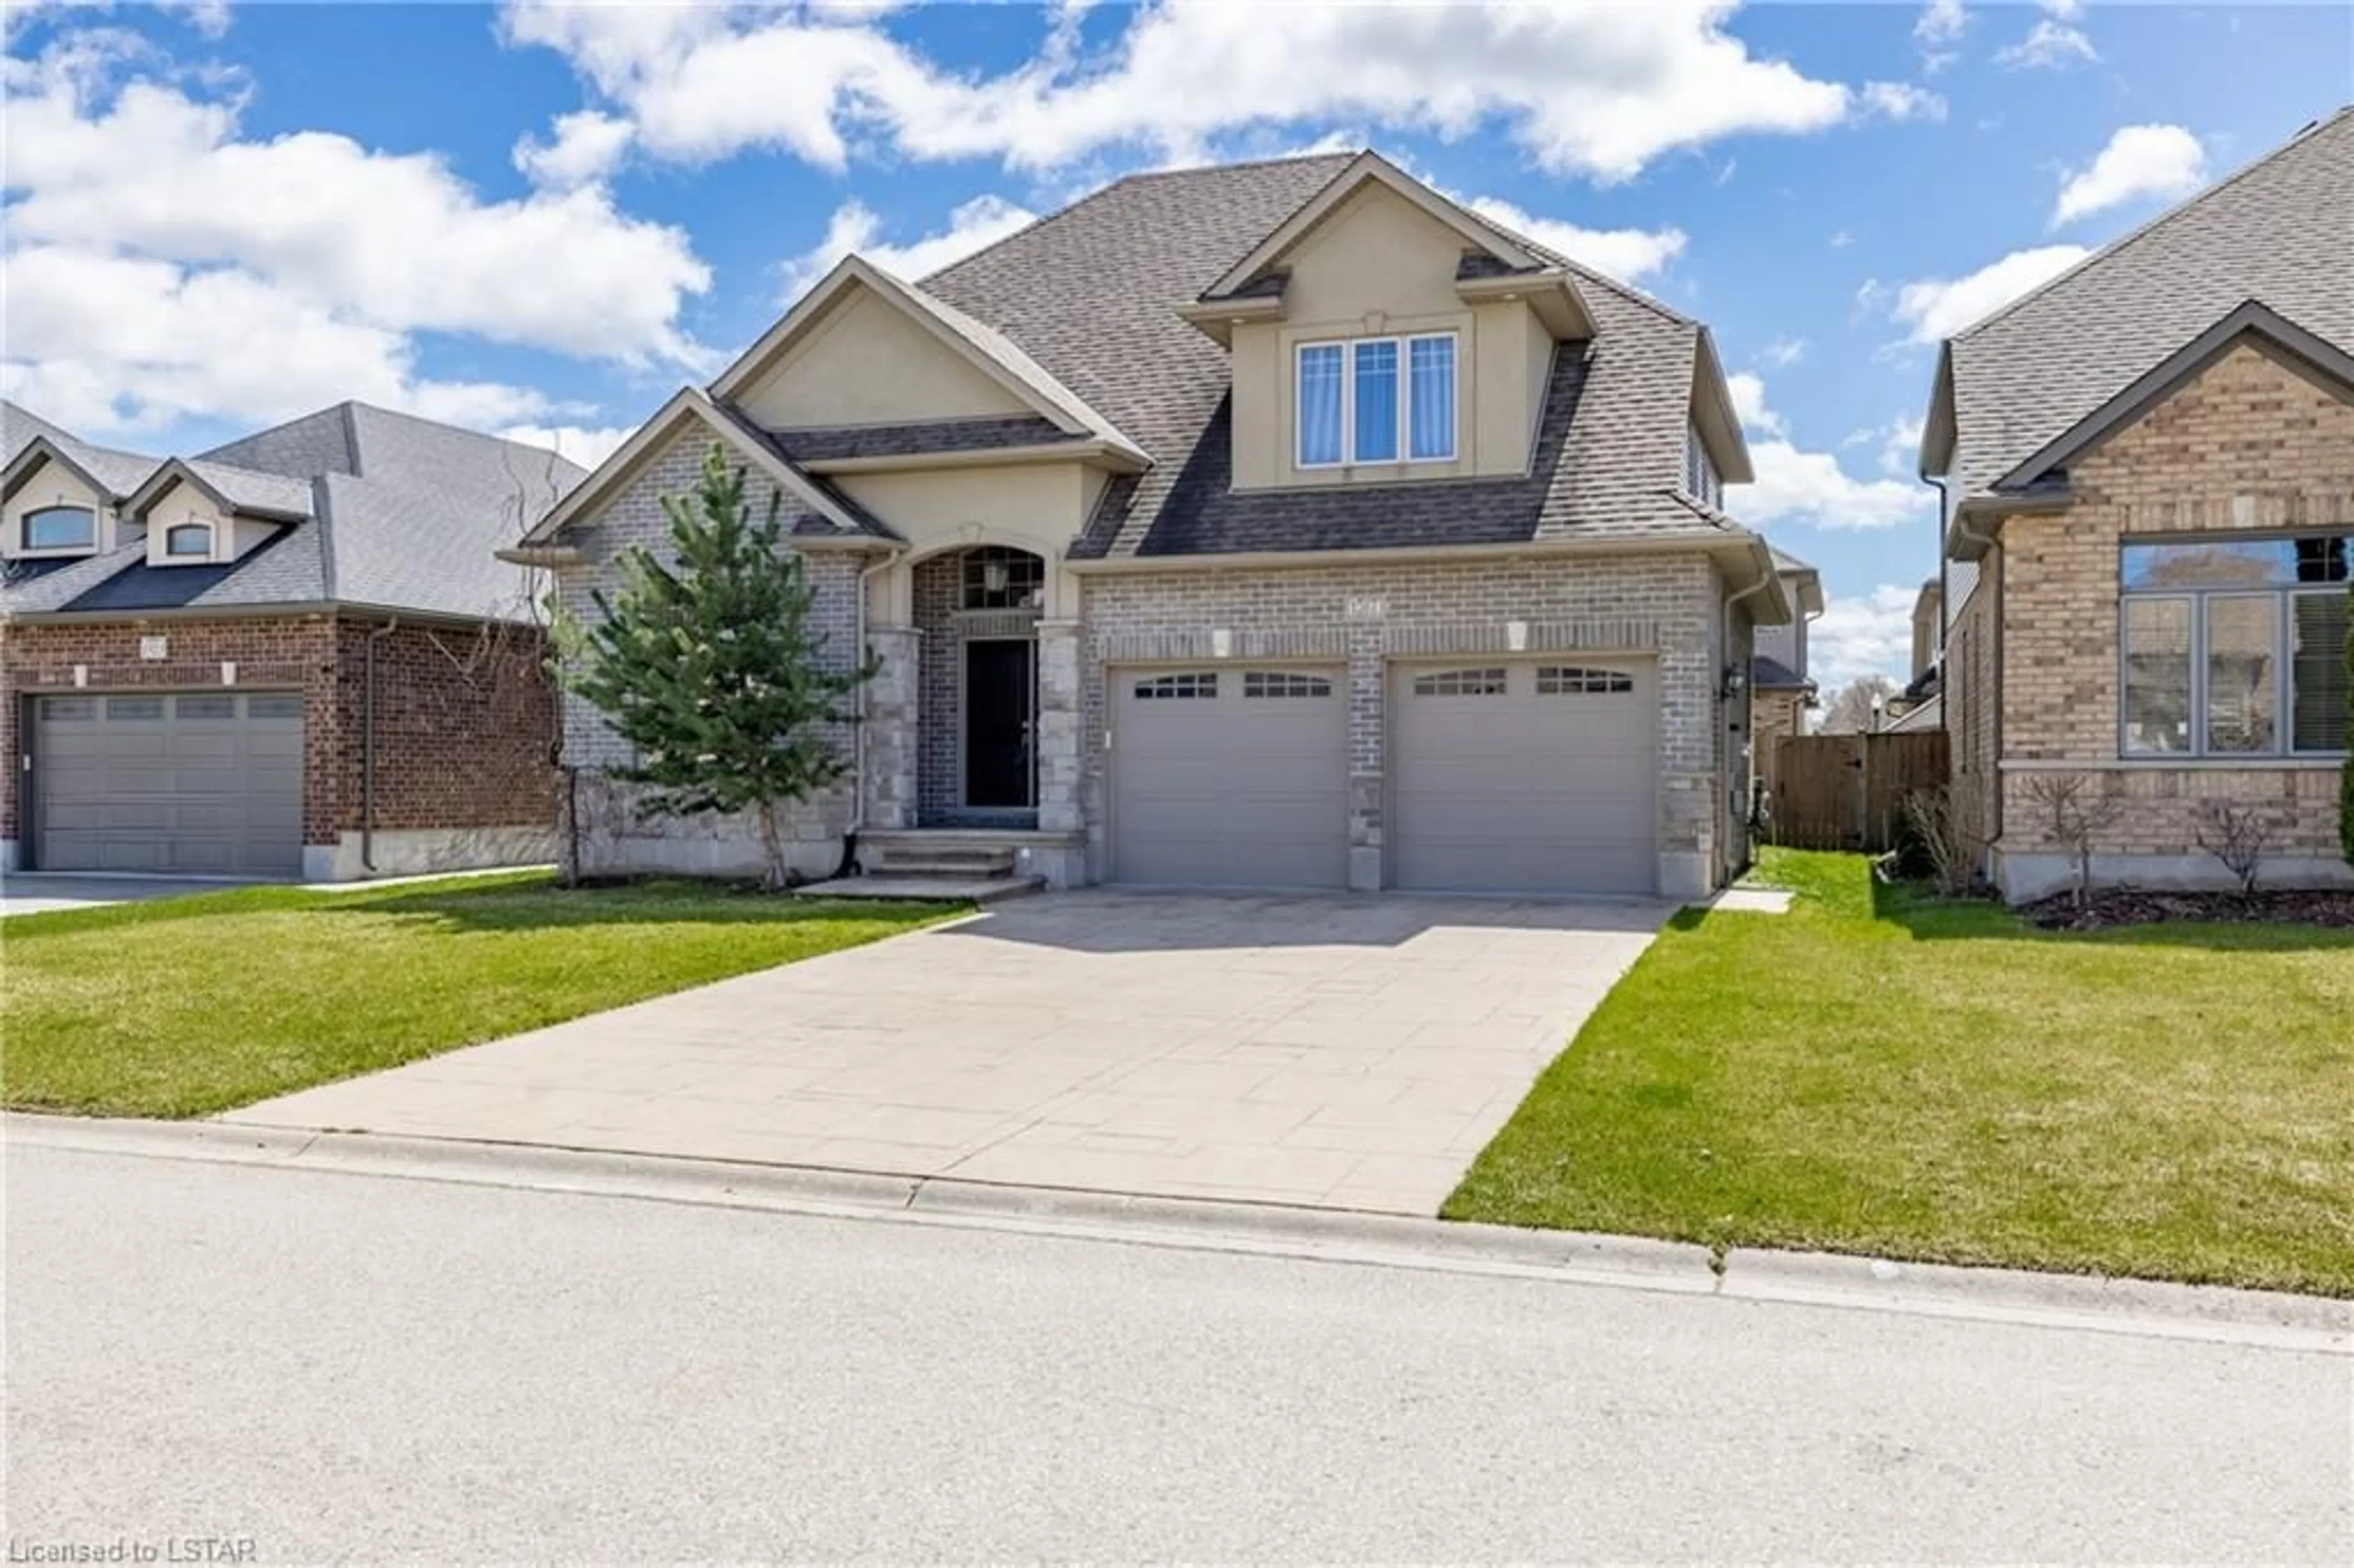 Frontside or backside of a home for 1517 Sandpiper Dr, London Ontario N5X 0E6